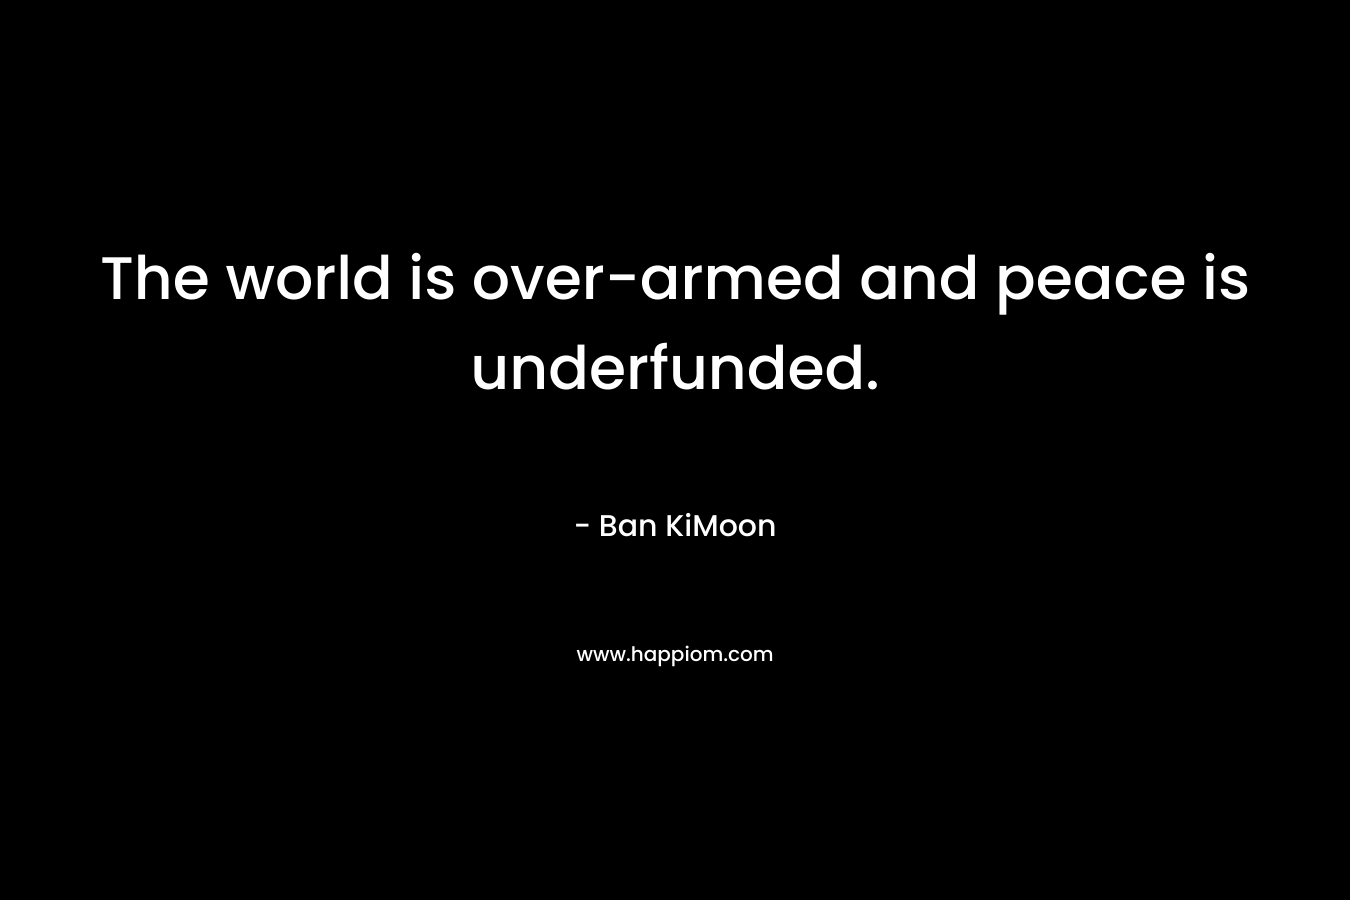 The world is over-armed and peace is underfunded. – Ban KiMoon